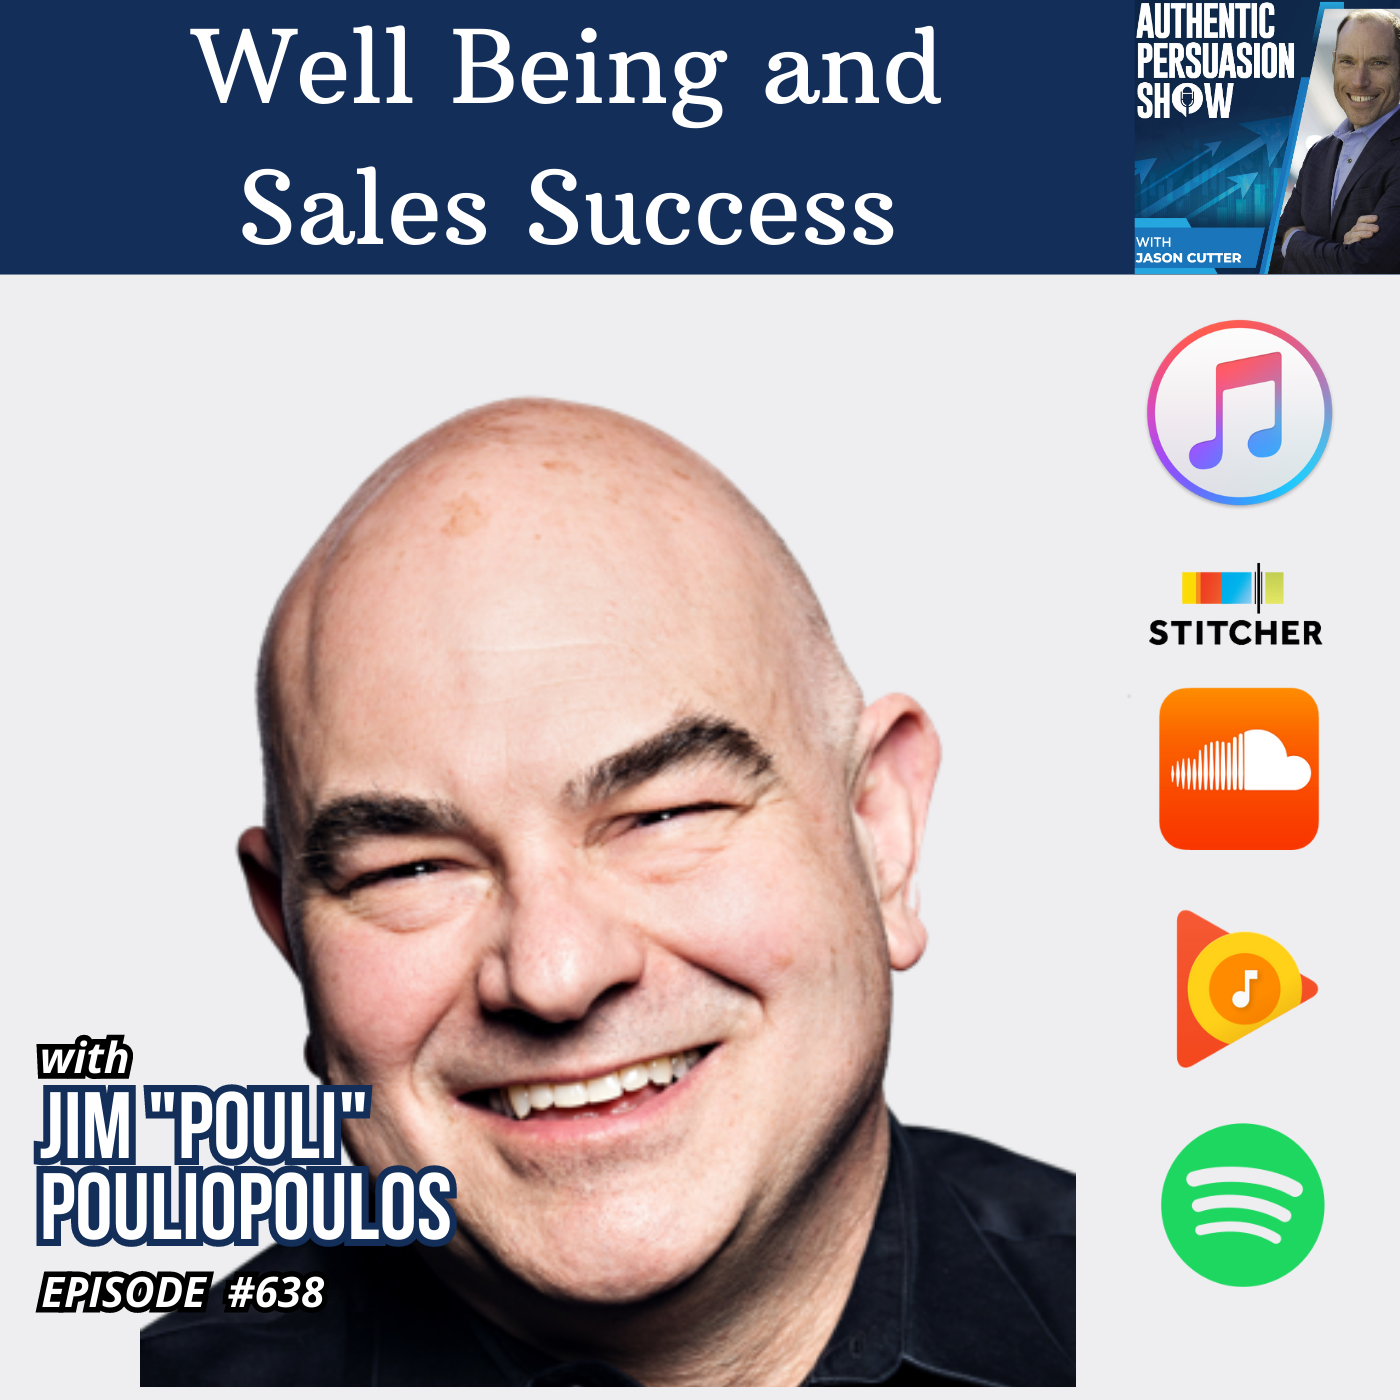 [638] Well Being and Sales Success, with Jim Pouliopoulos from Bentley University